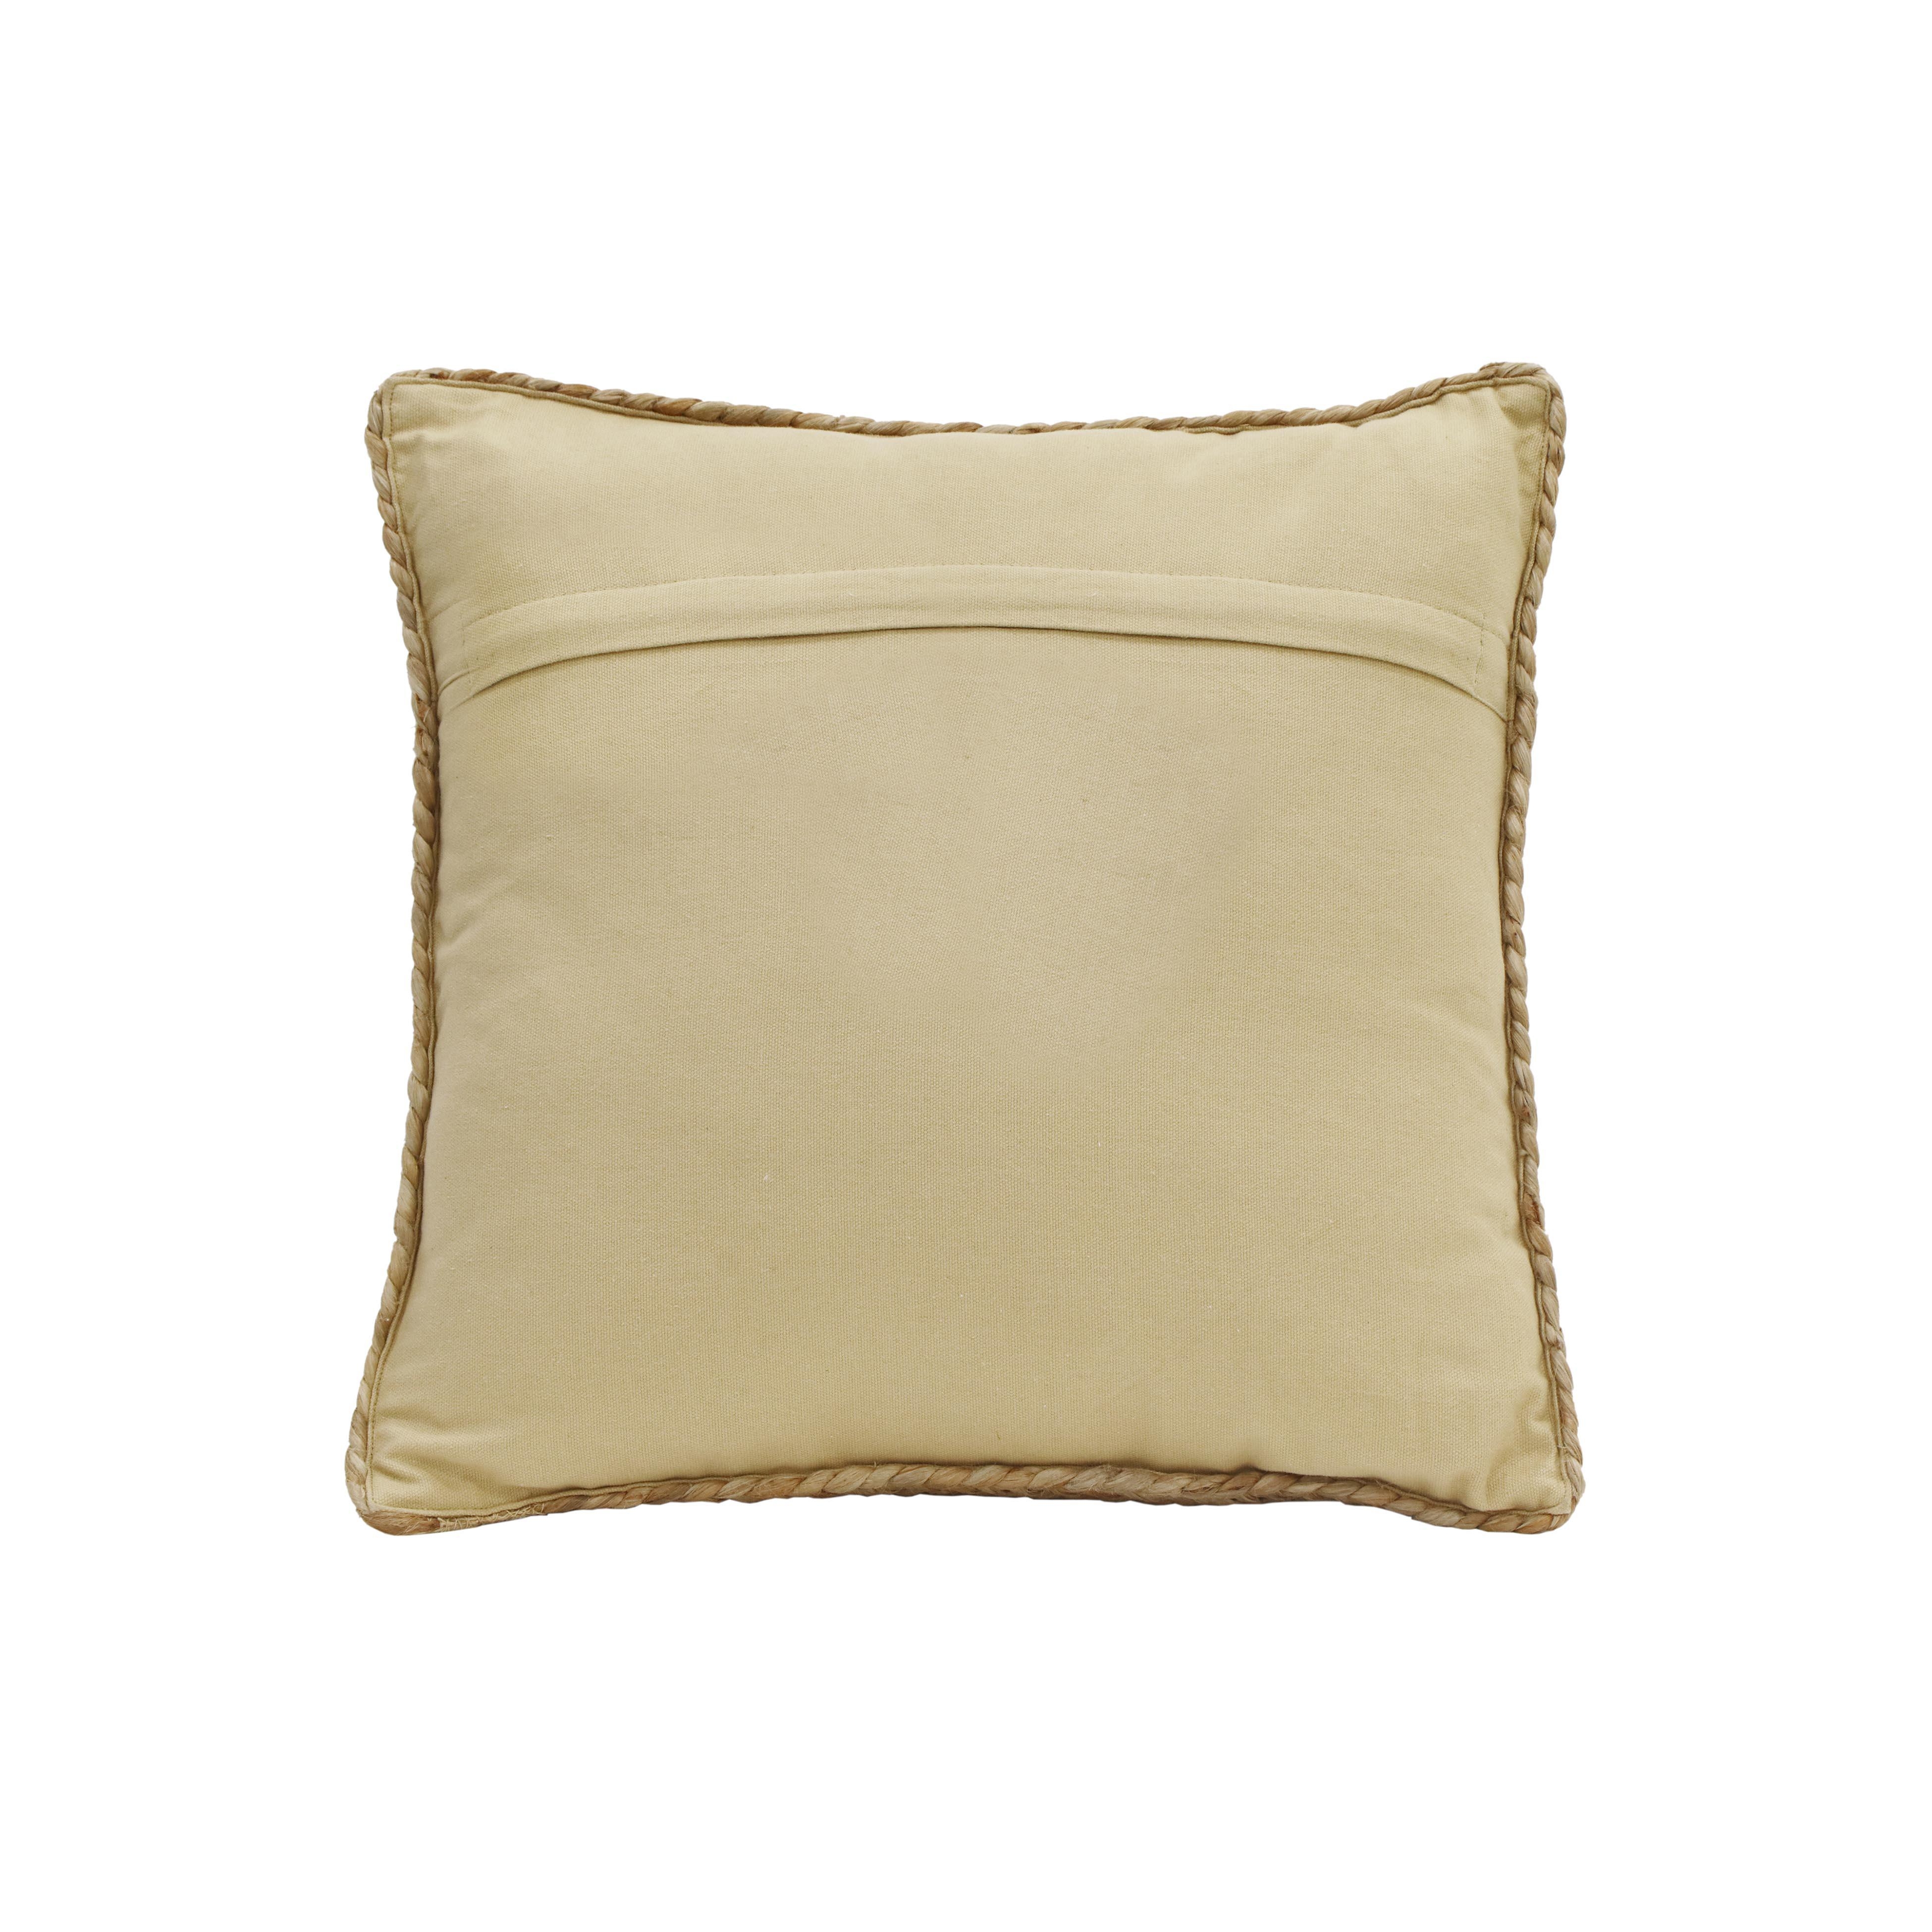 Blank Mind White Square Accent Pillow - Image 2